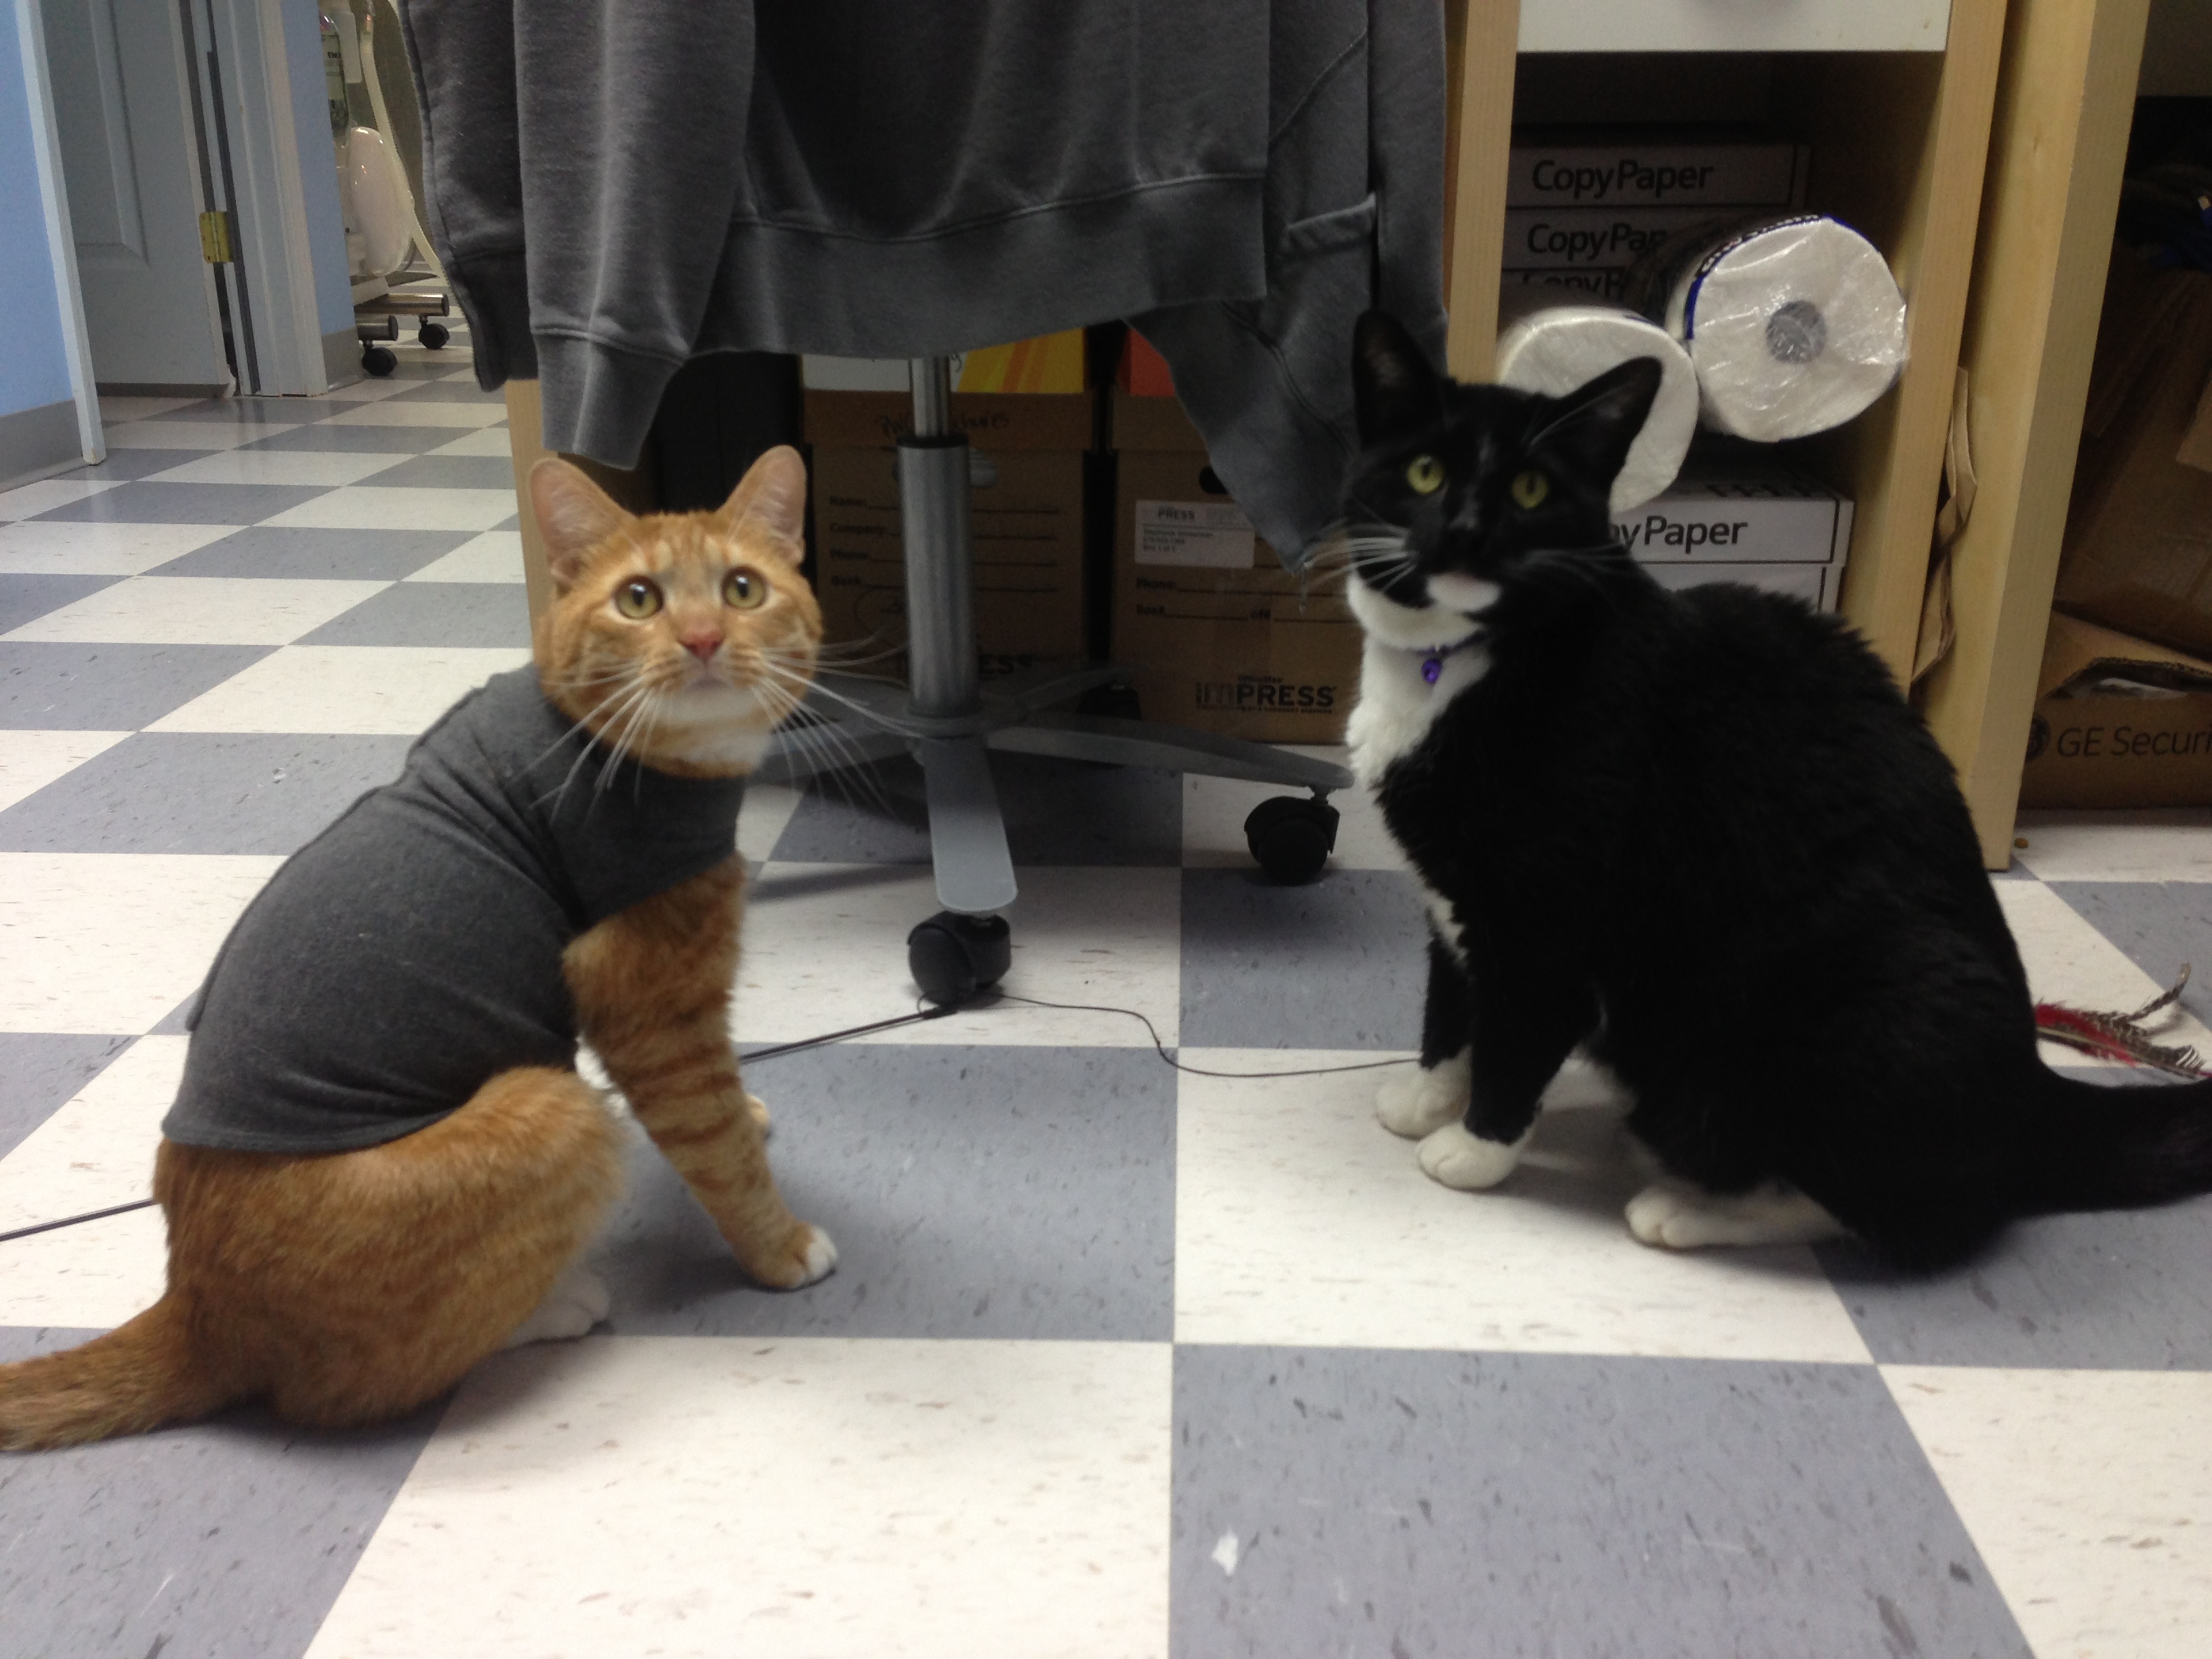 Thundershirt being used to humble the aggressive cat.